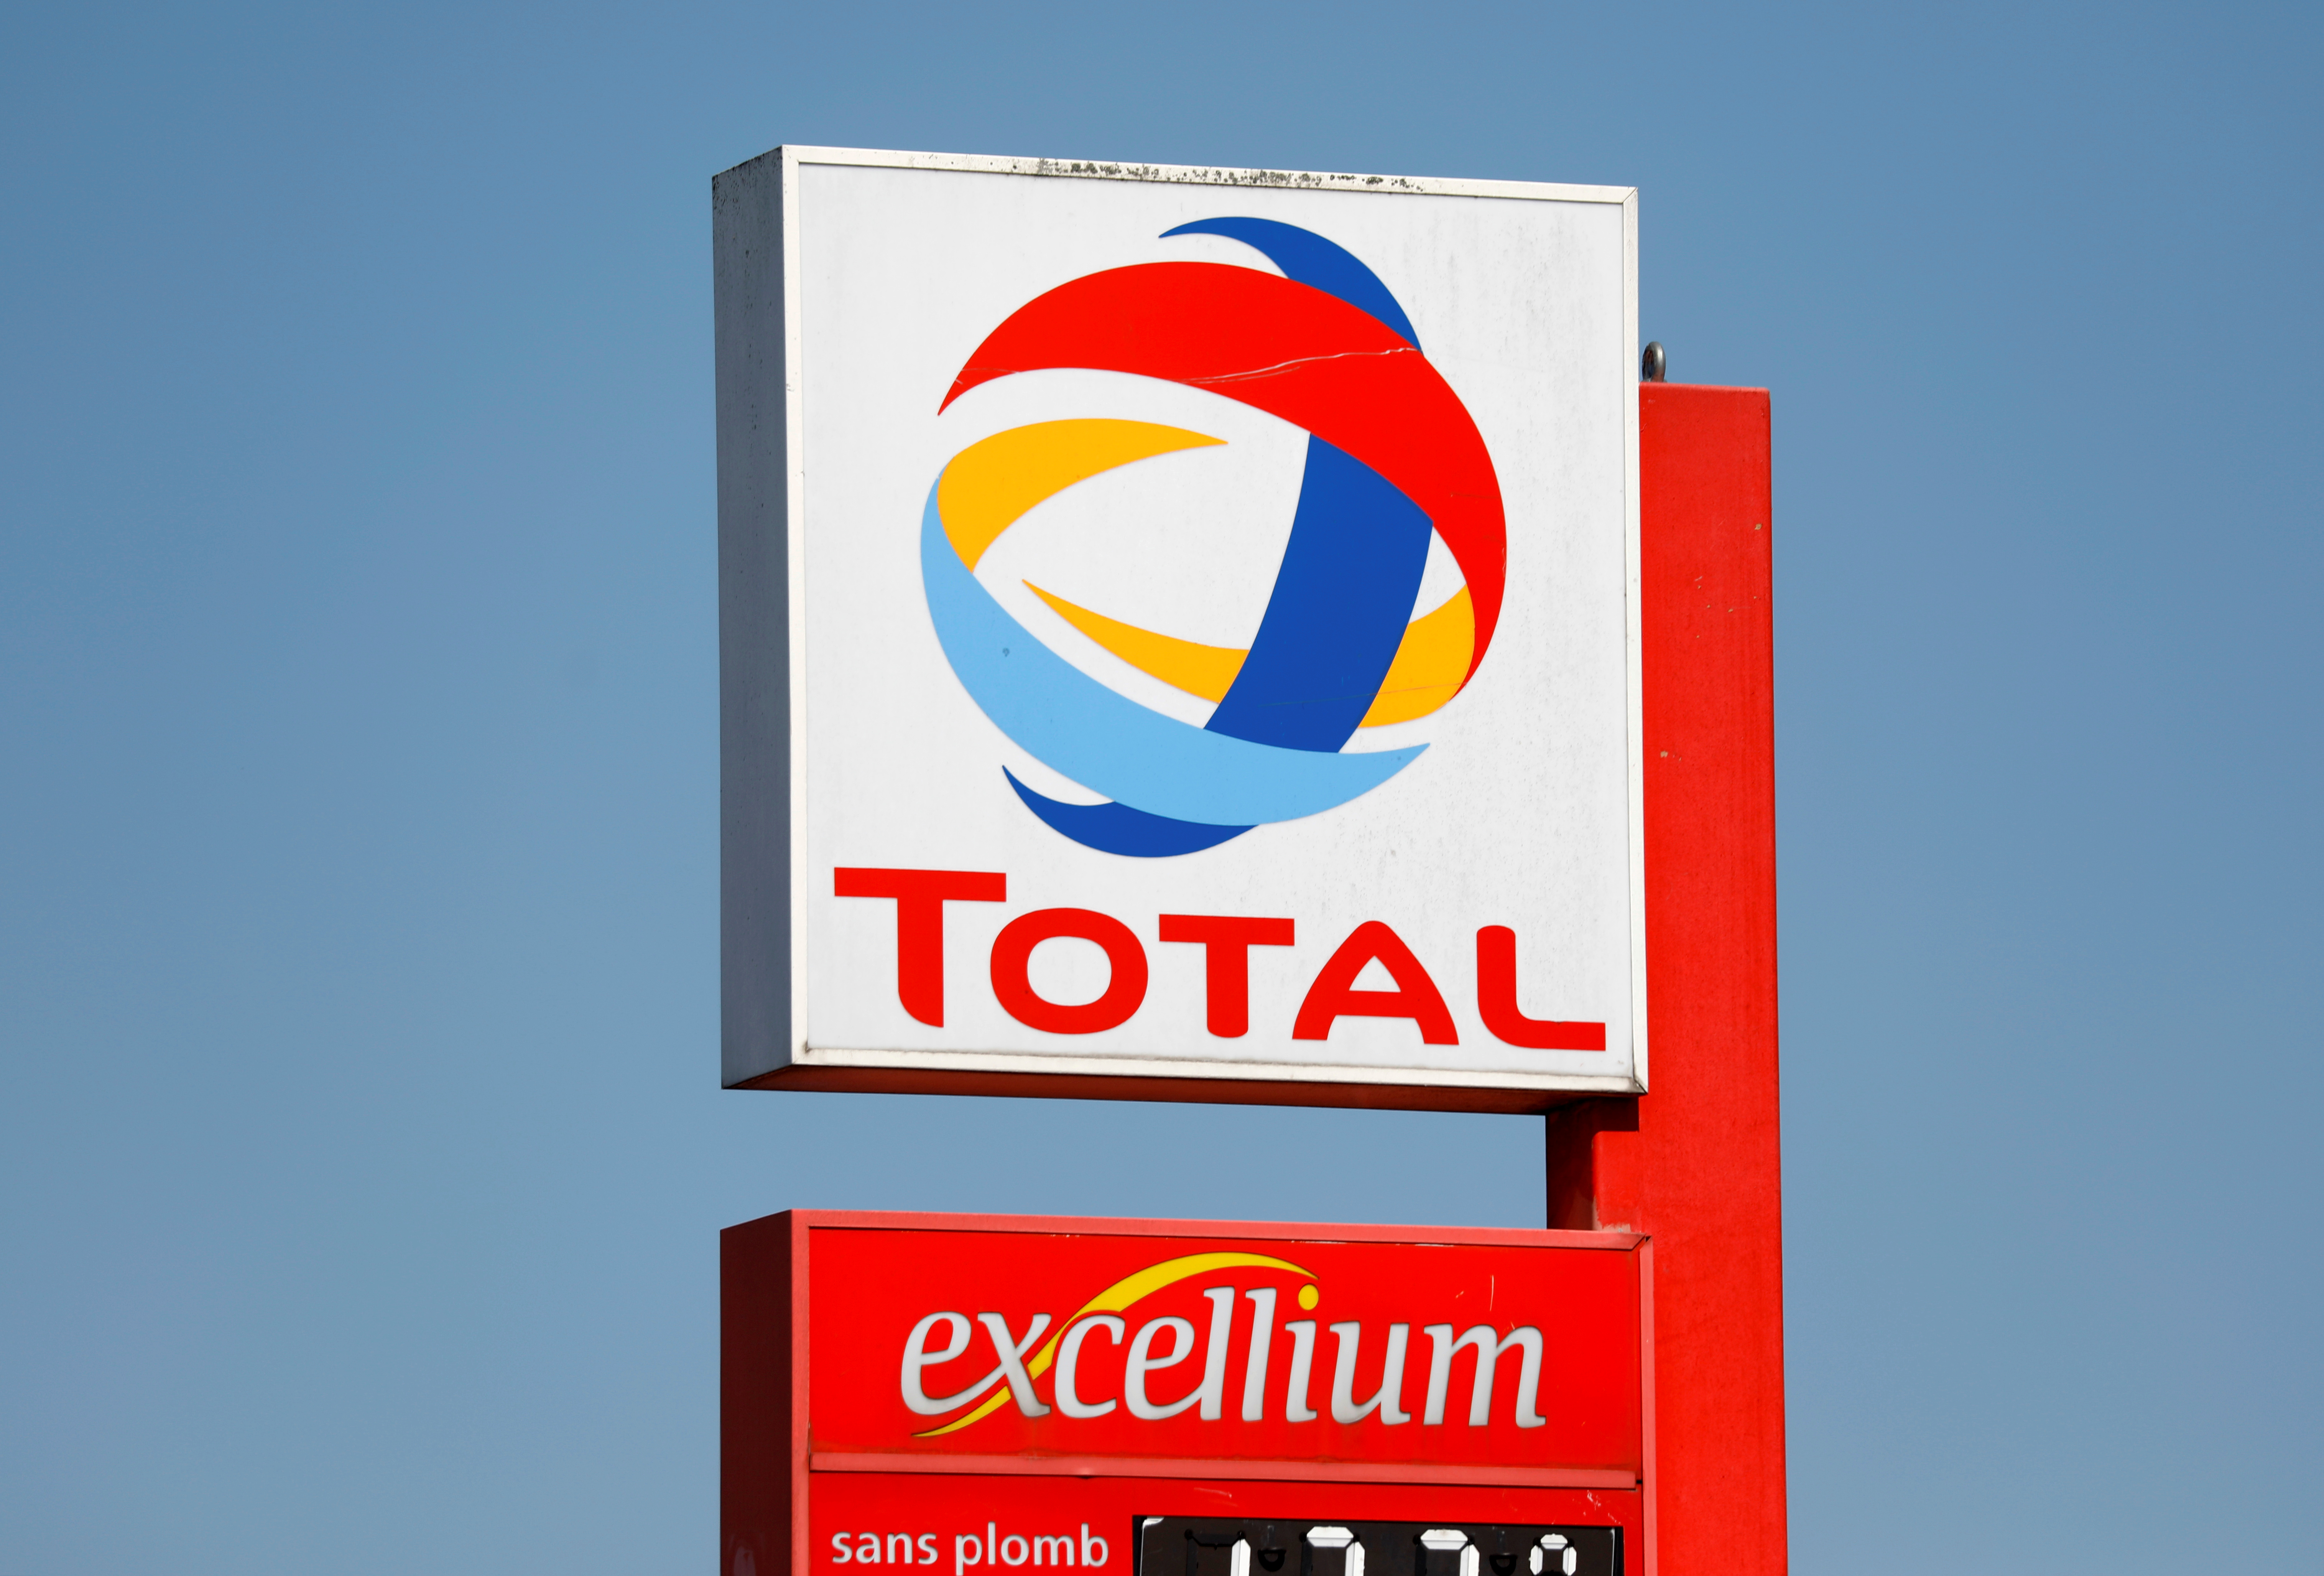 Logo of Total company on a gas station in Montreuil